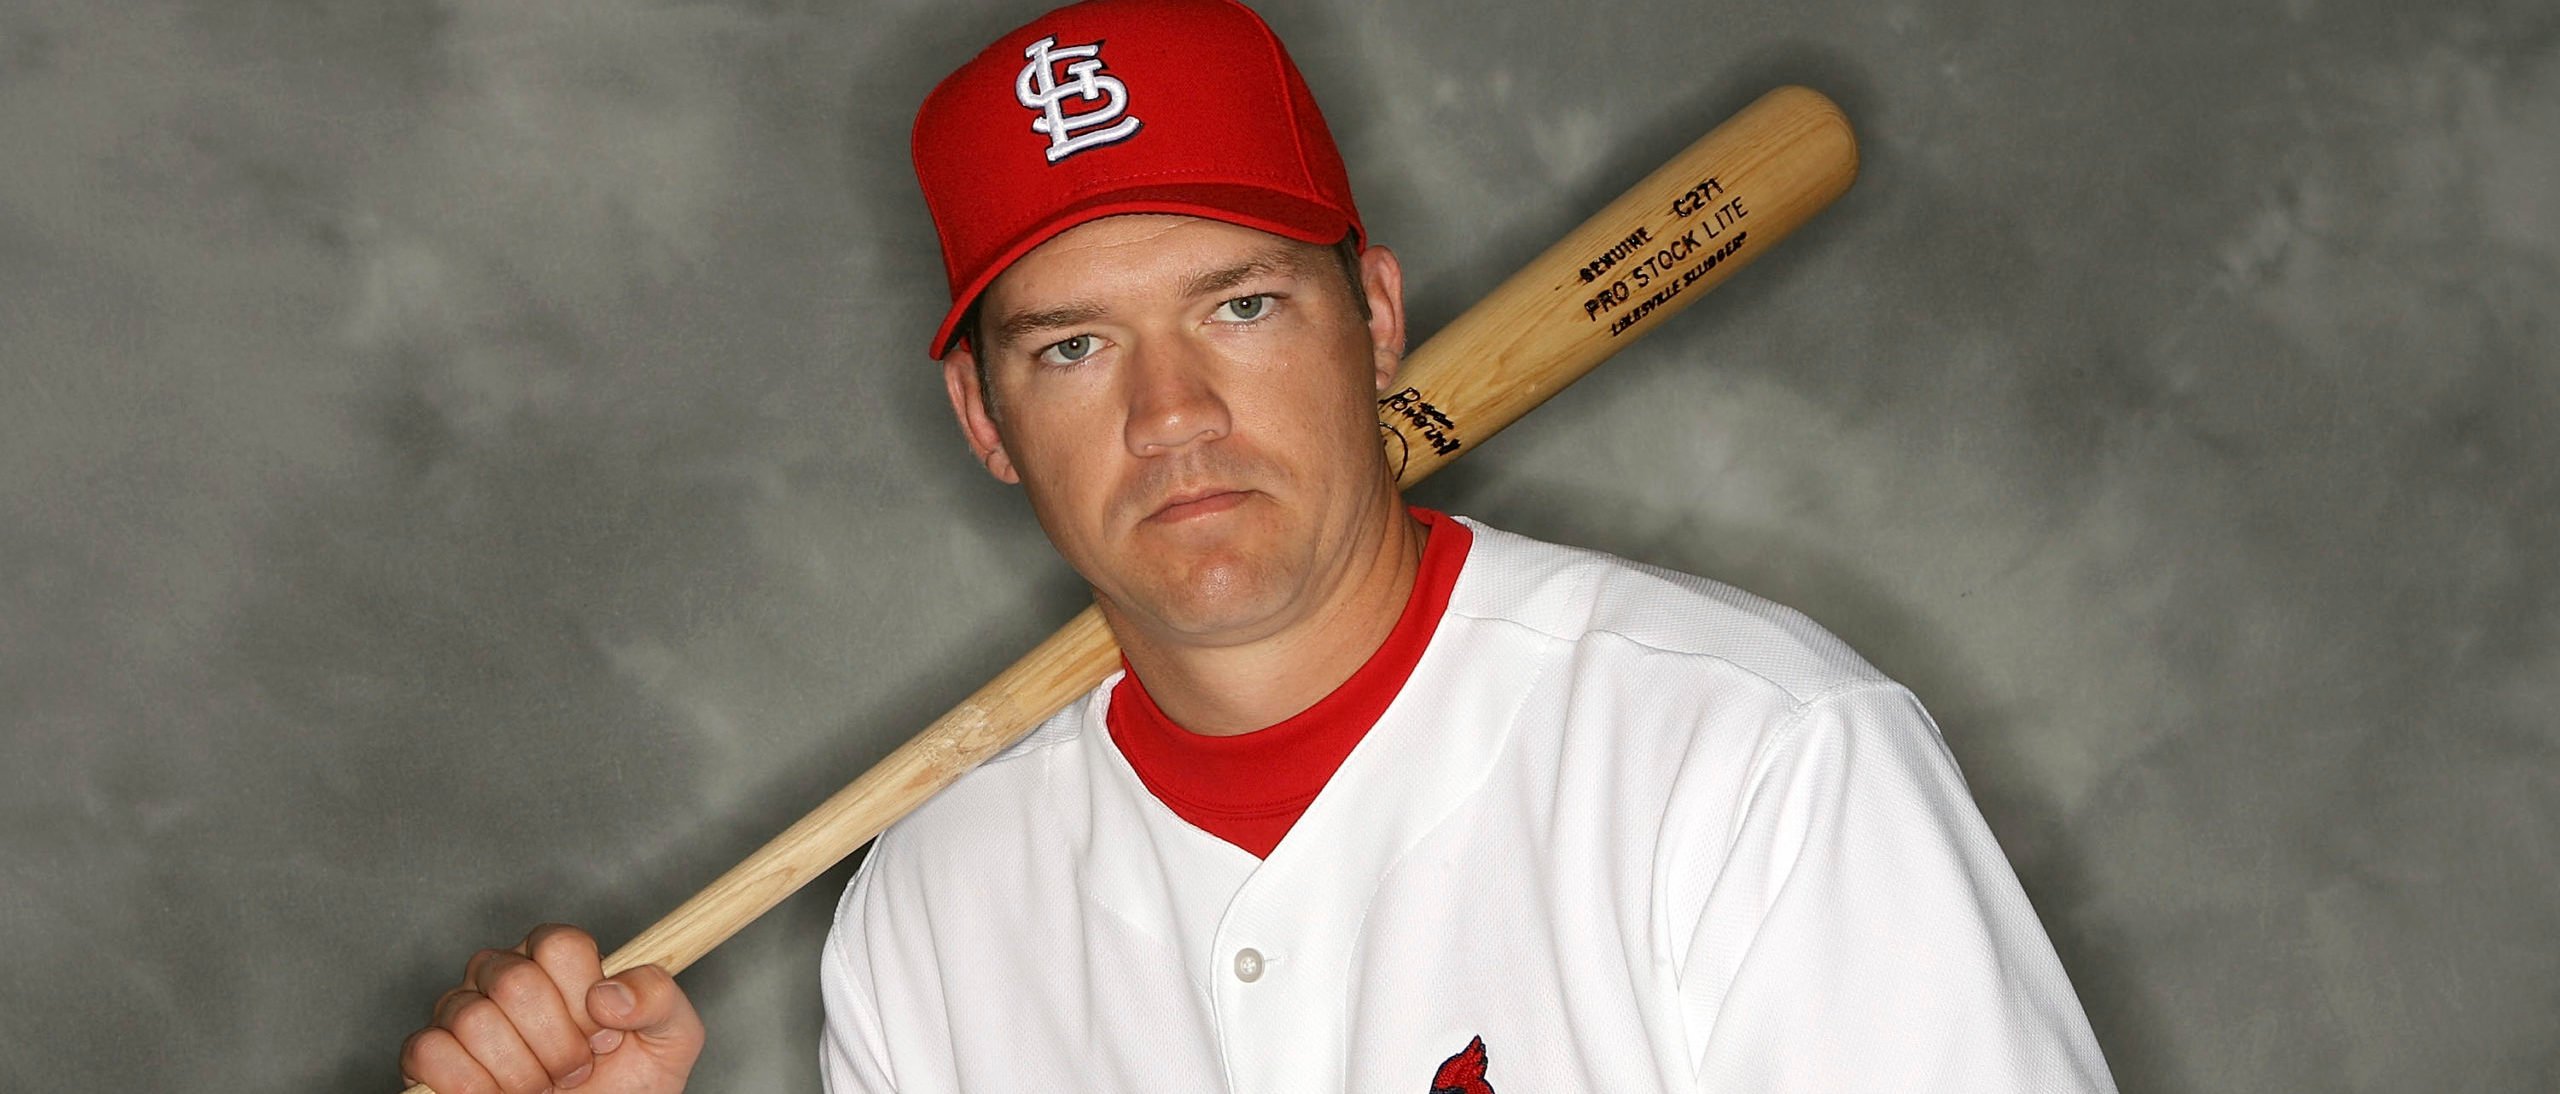 Congratulations to former Reds All-Star 3B Scott Rolen on his